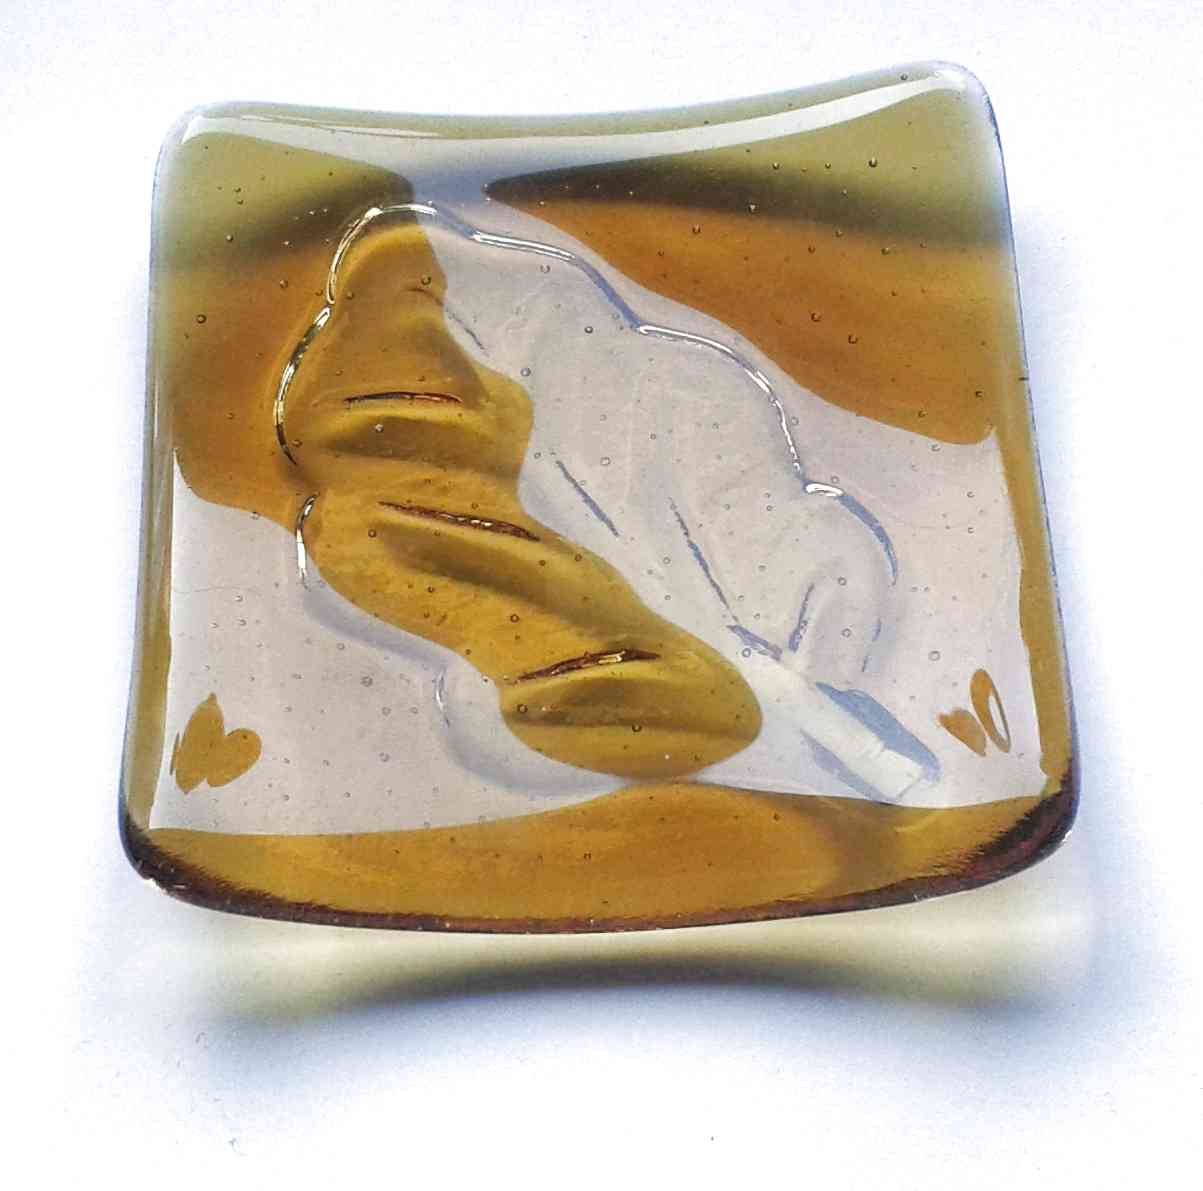 Amber glass leaf jewellery dish. This small jewellery or trinket bowl is handcrafted individually in dark amber glass. Made in north-east England.